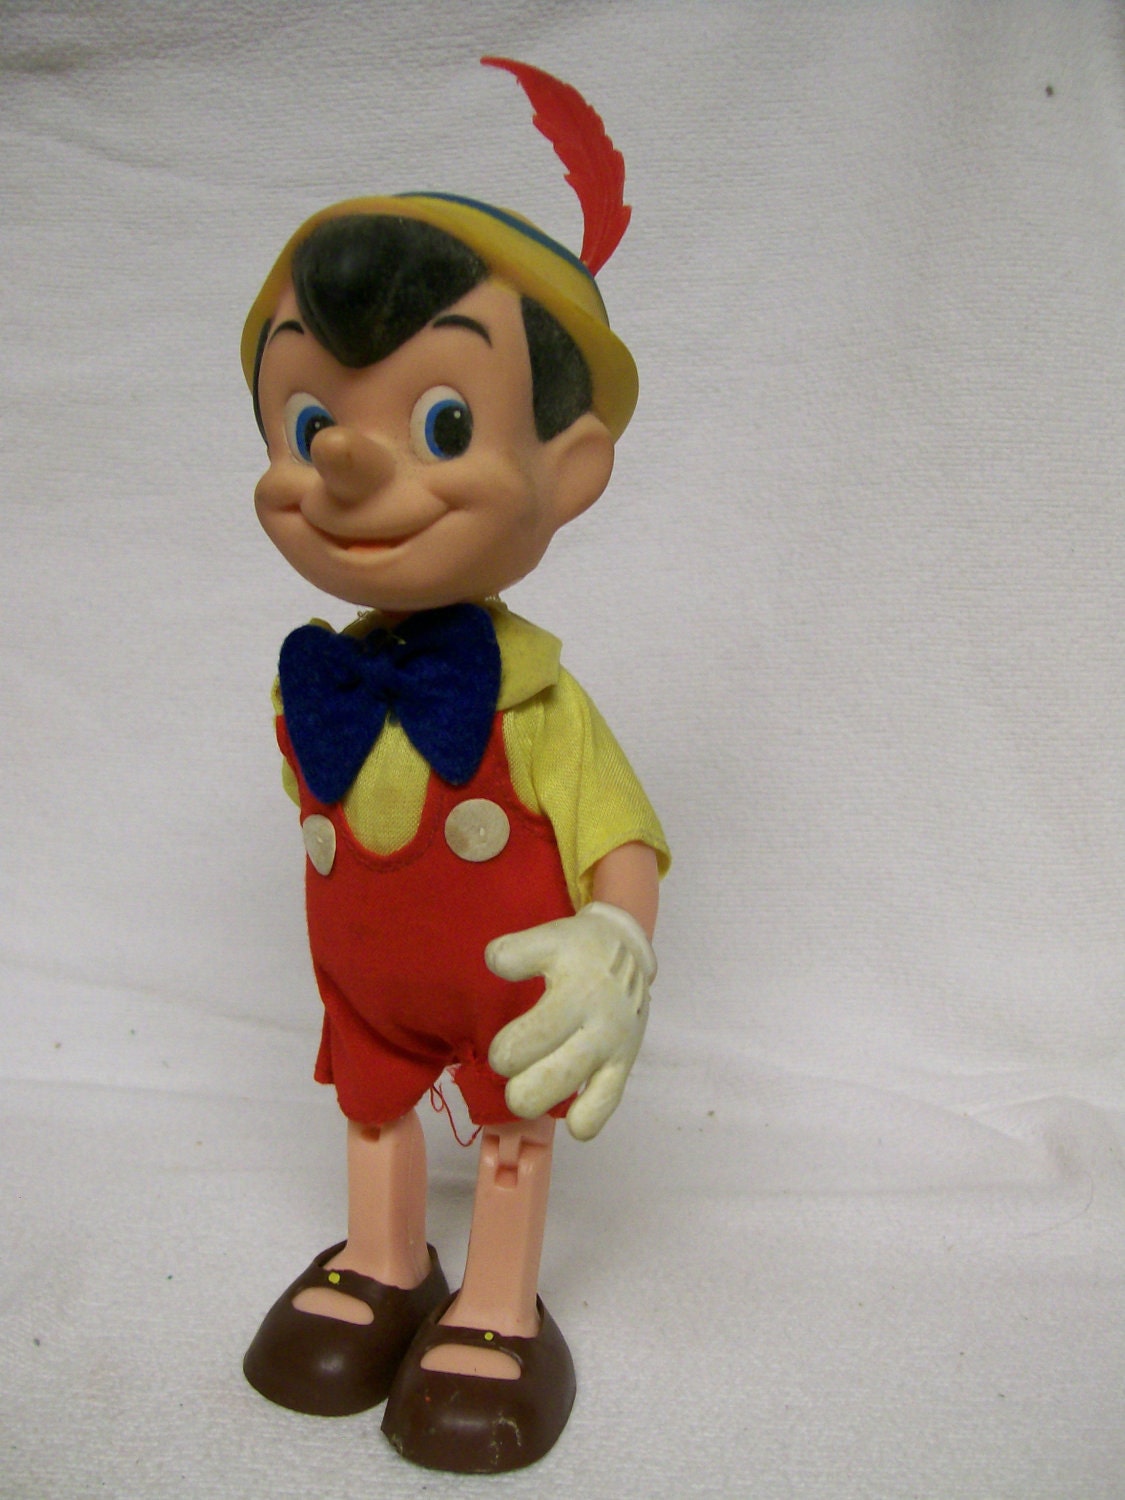 Vintage Pinocchio Doll by Dakin Made in Hong Kong